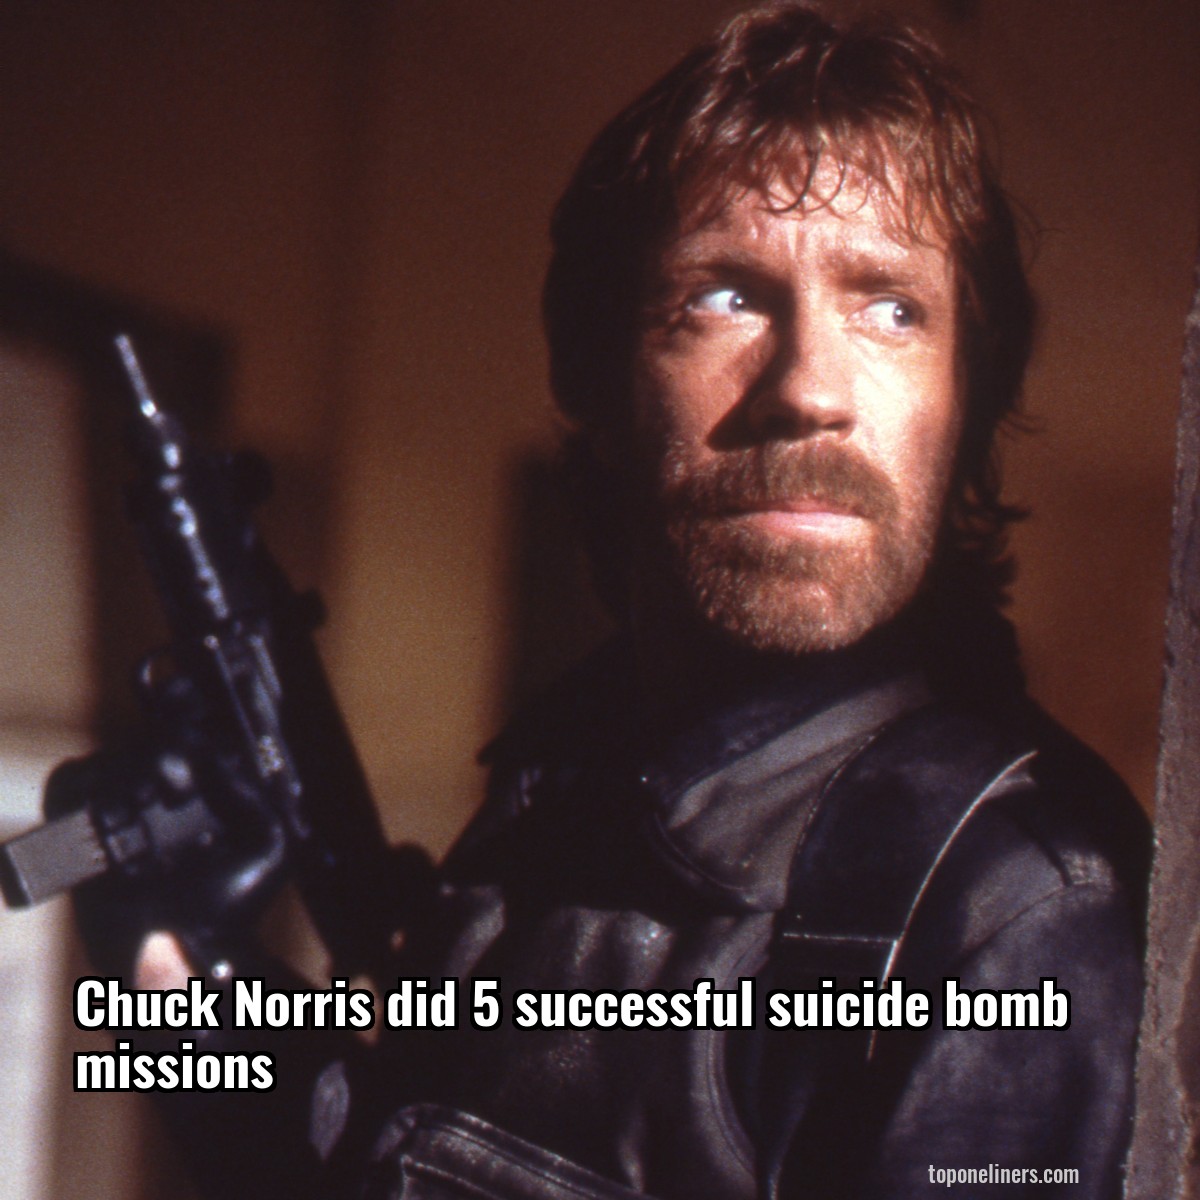 Chuck Norris did 5 successful suicide bomb missions